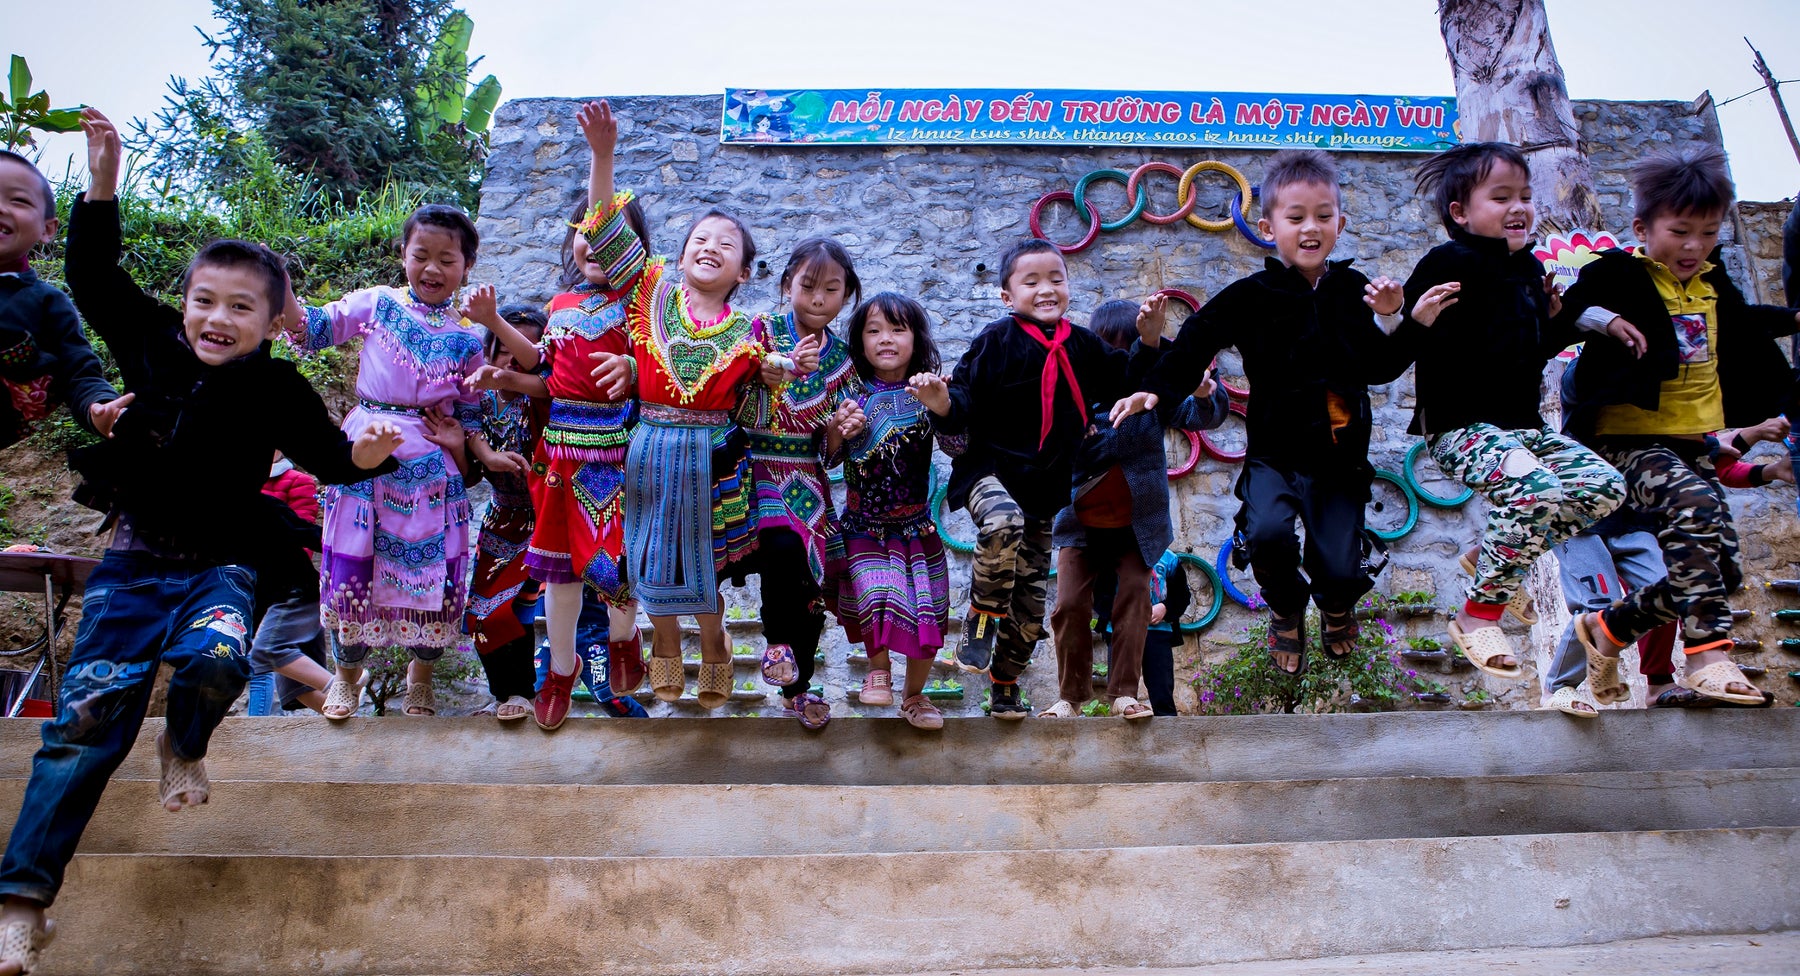 A group of young children are jumping and smiling